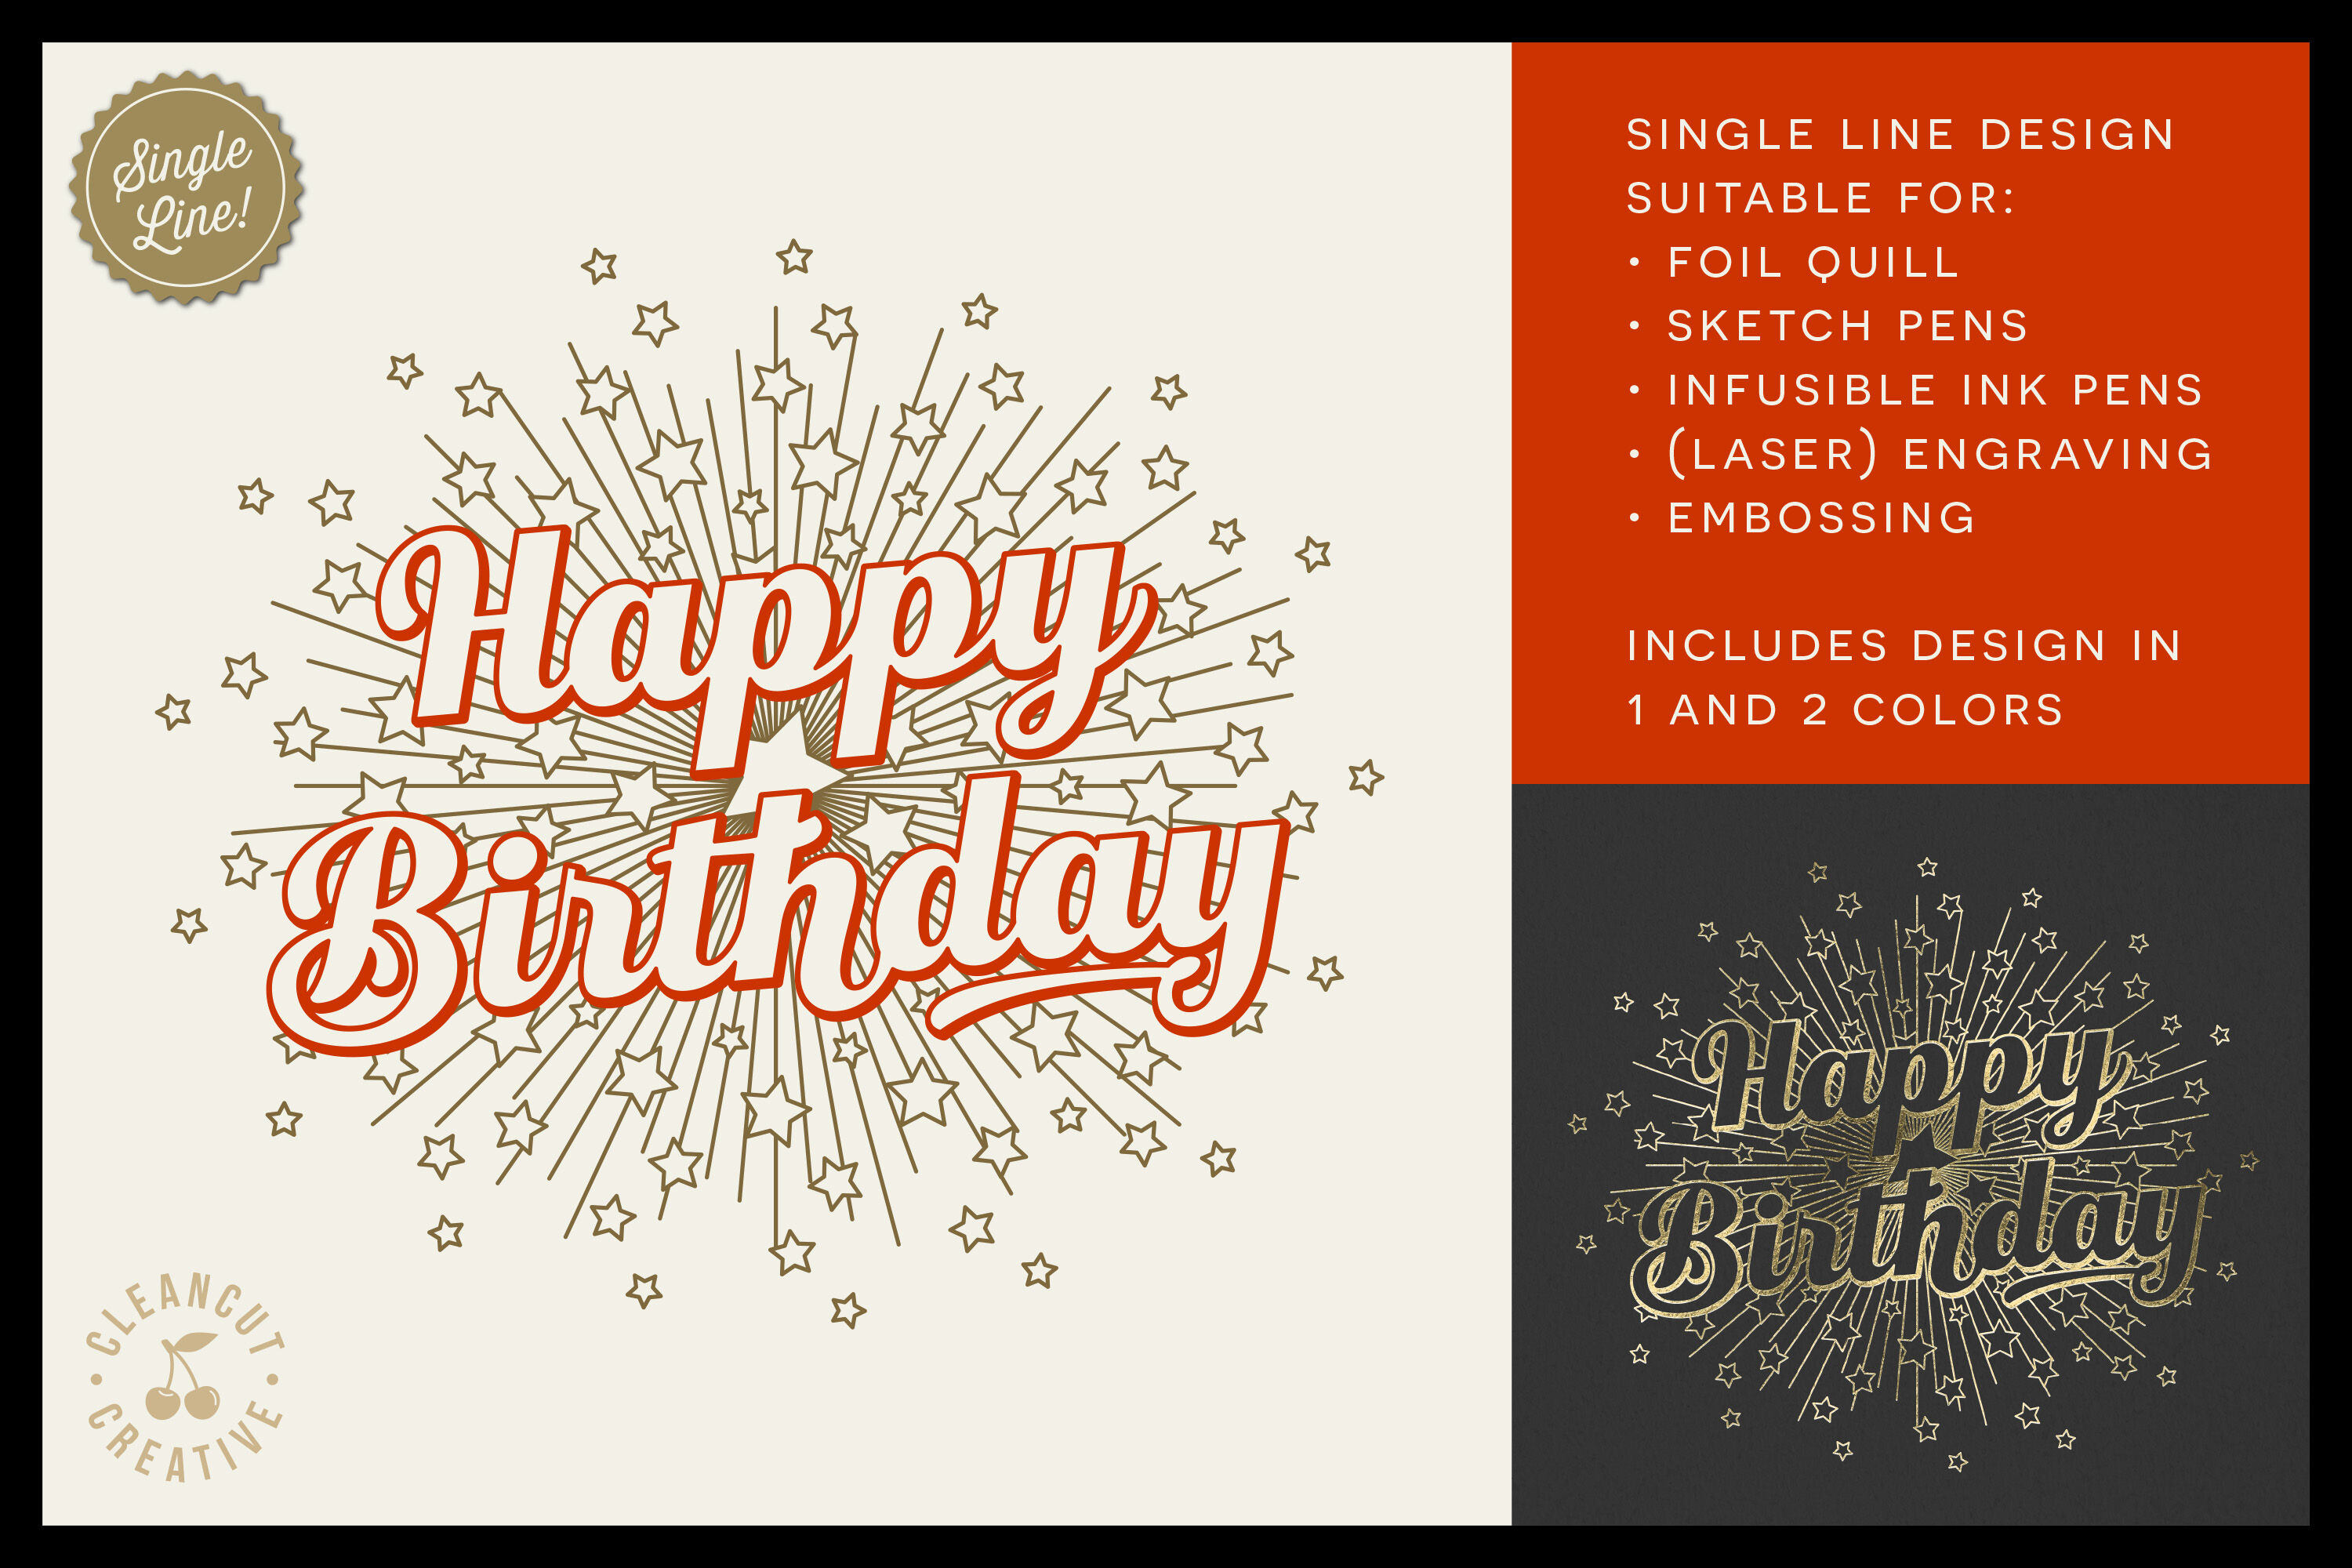 How To Make Cricut Foil Happy Birthday Card Online